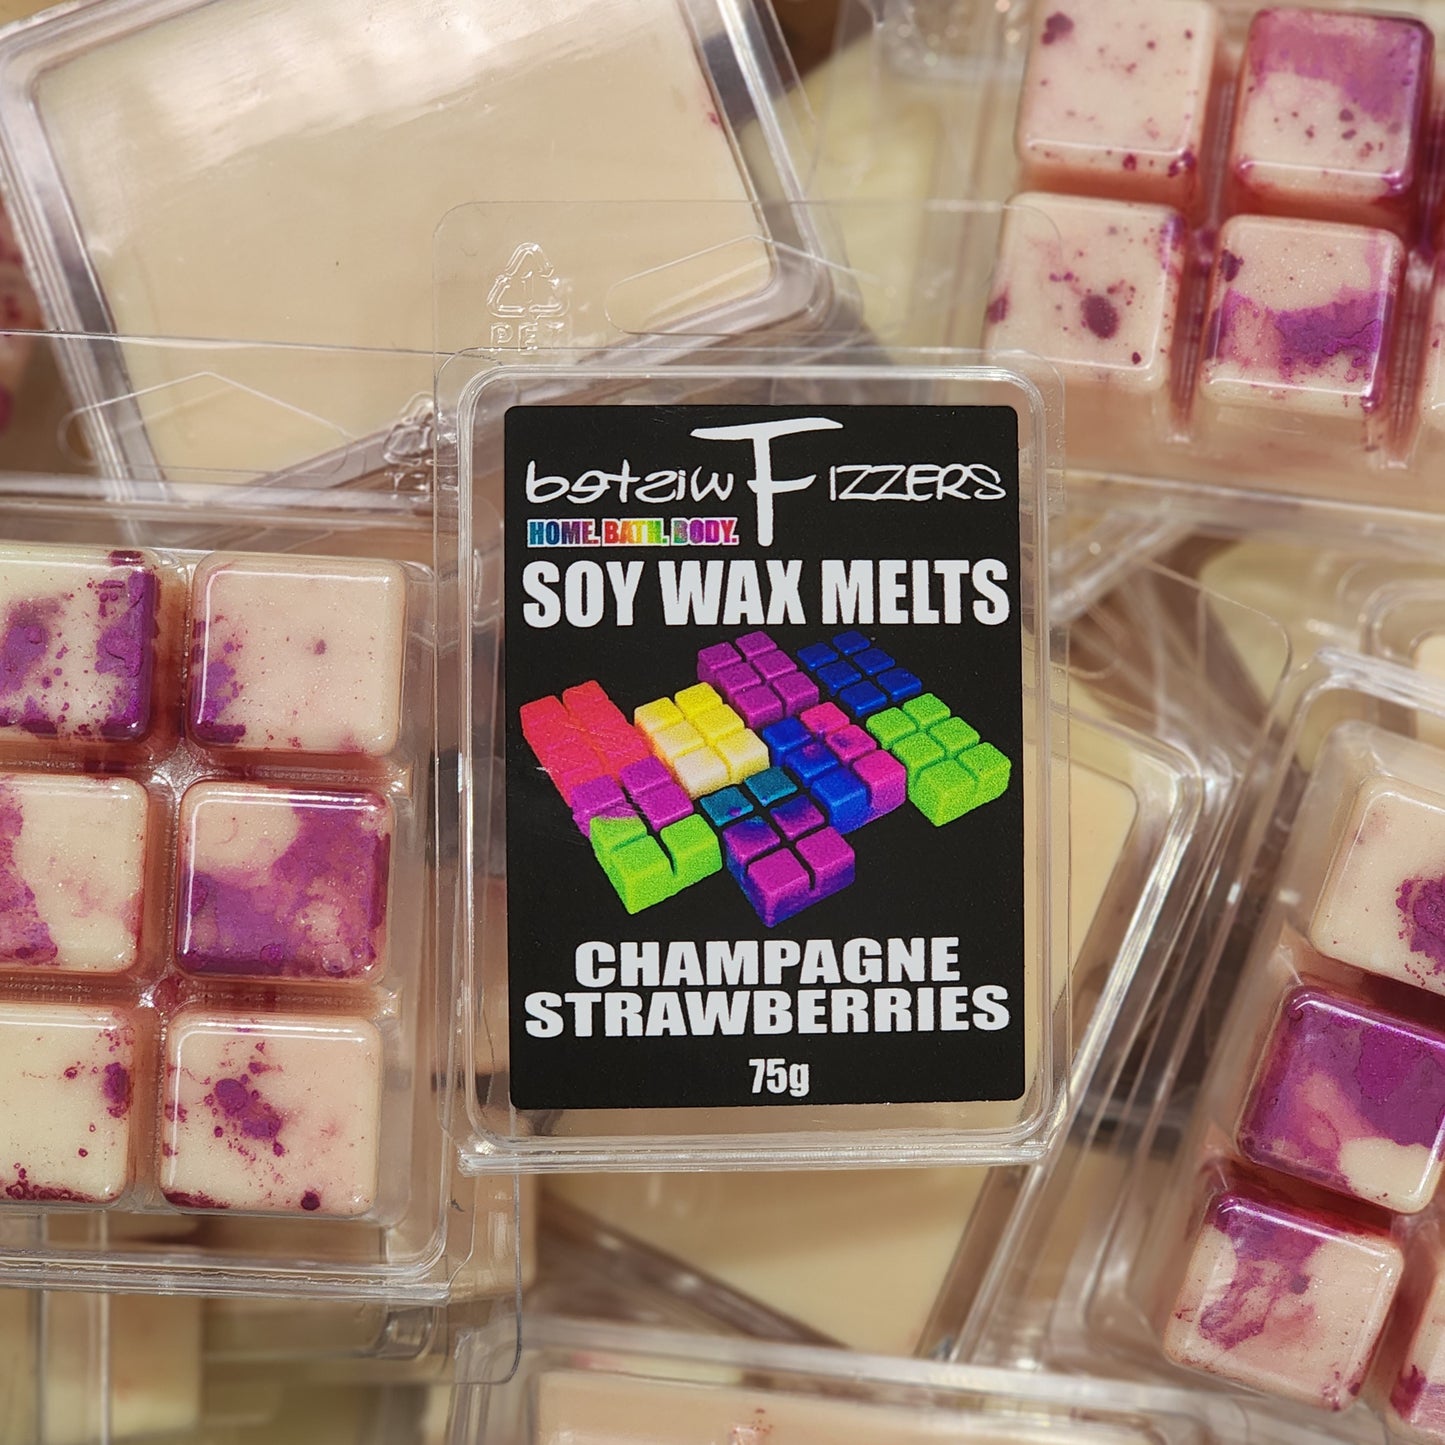 Soy Wax Melts - Campagne Strawberries 